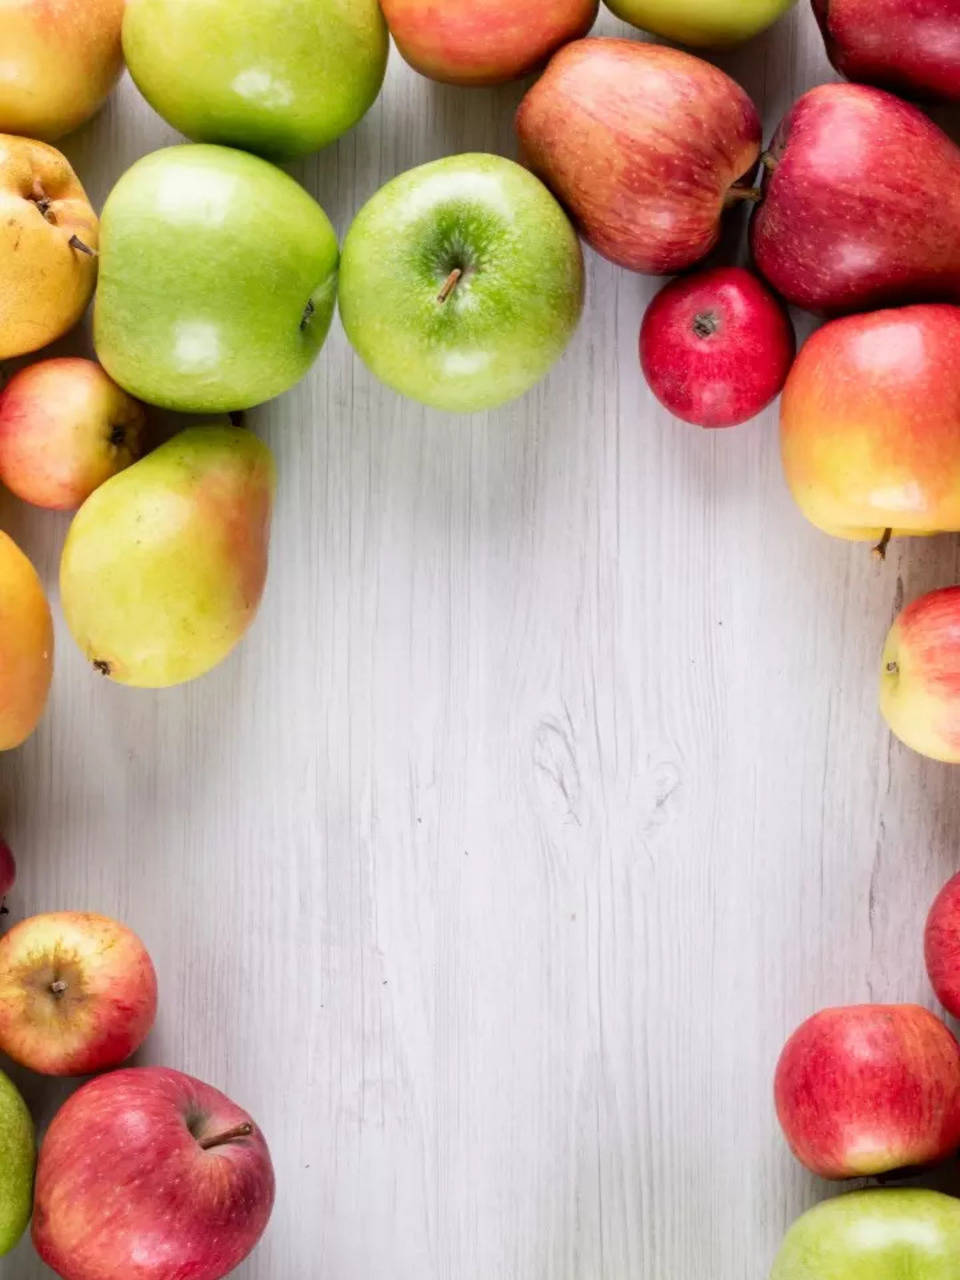 The Health Benefits of Granny Smith Apples